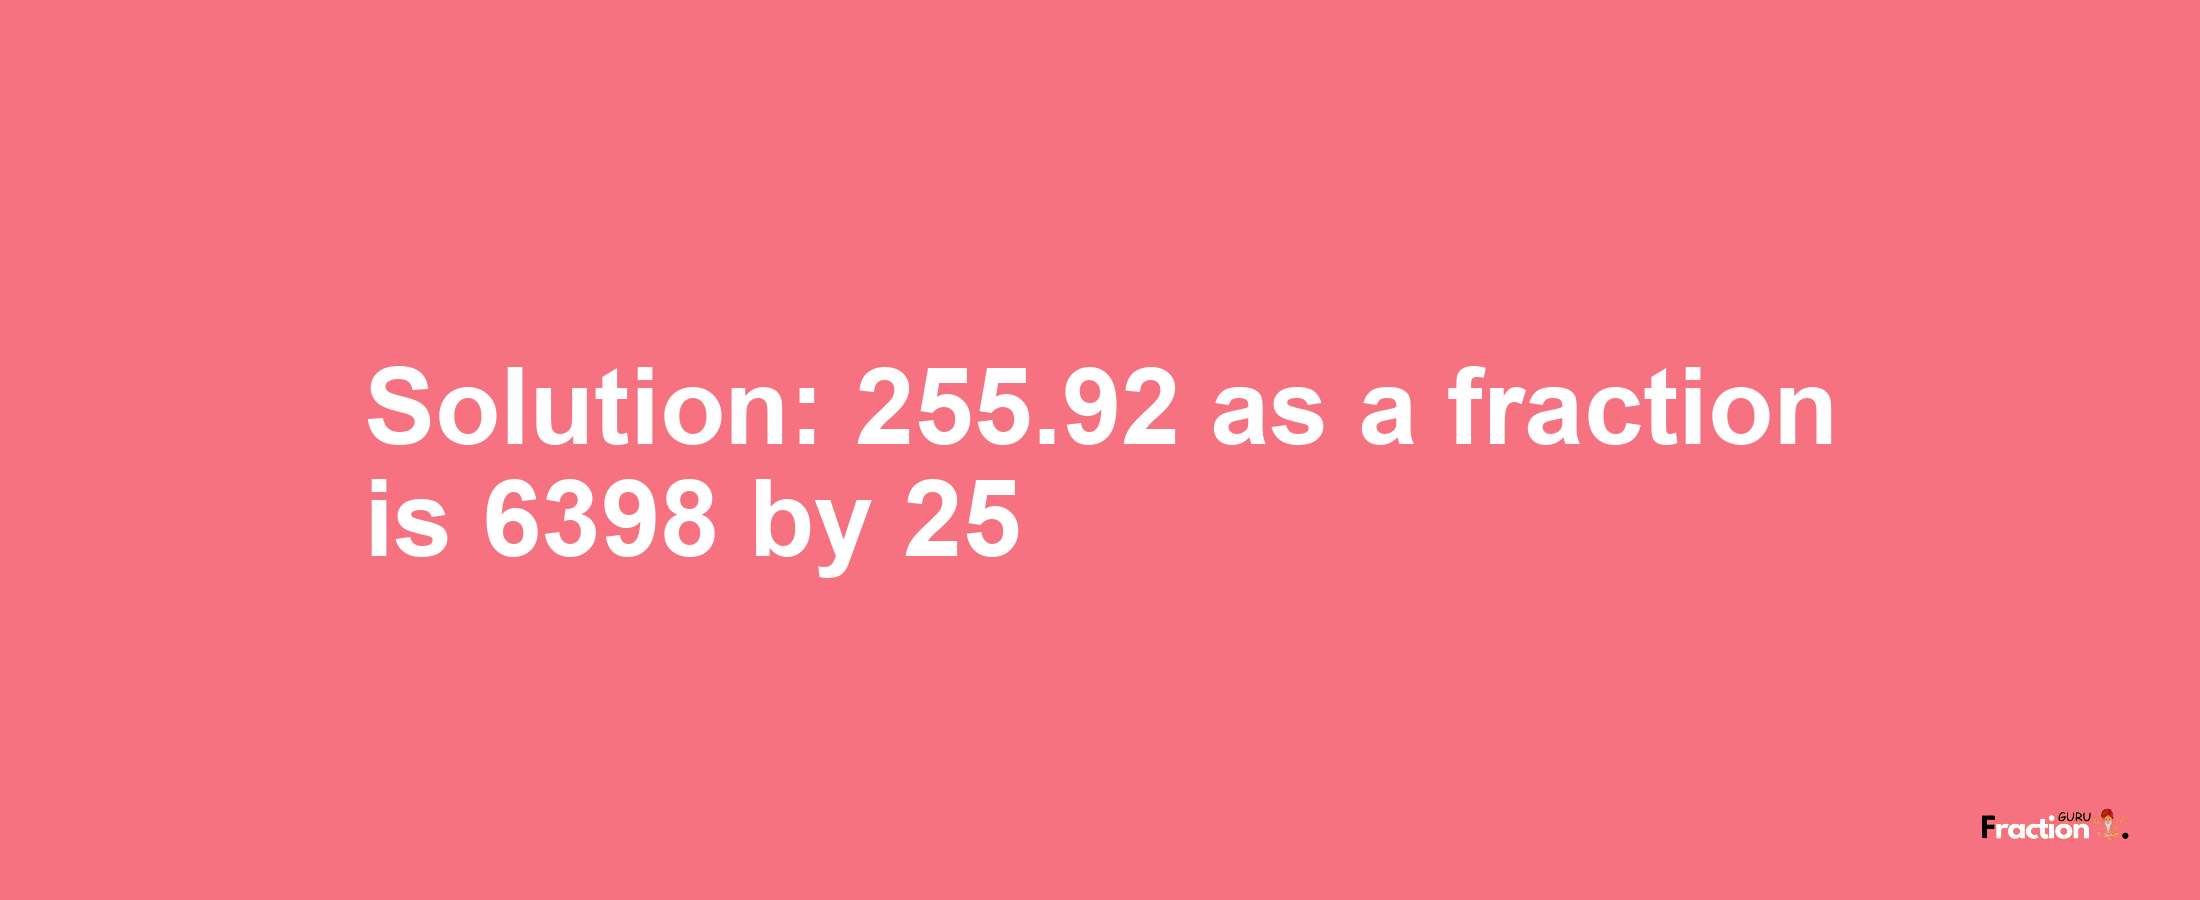 Solution:255.92 as a fraction is 6398/25